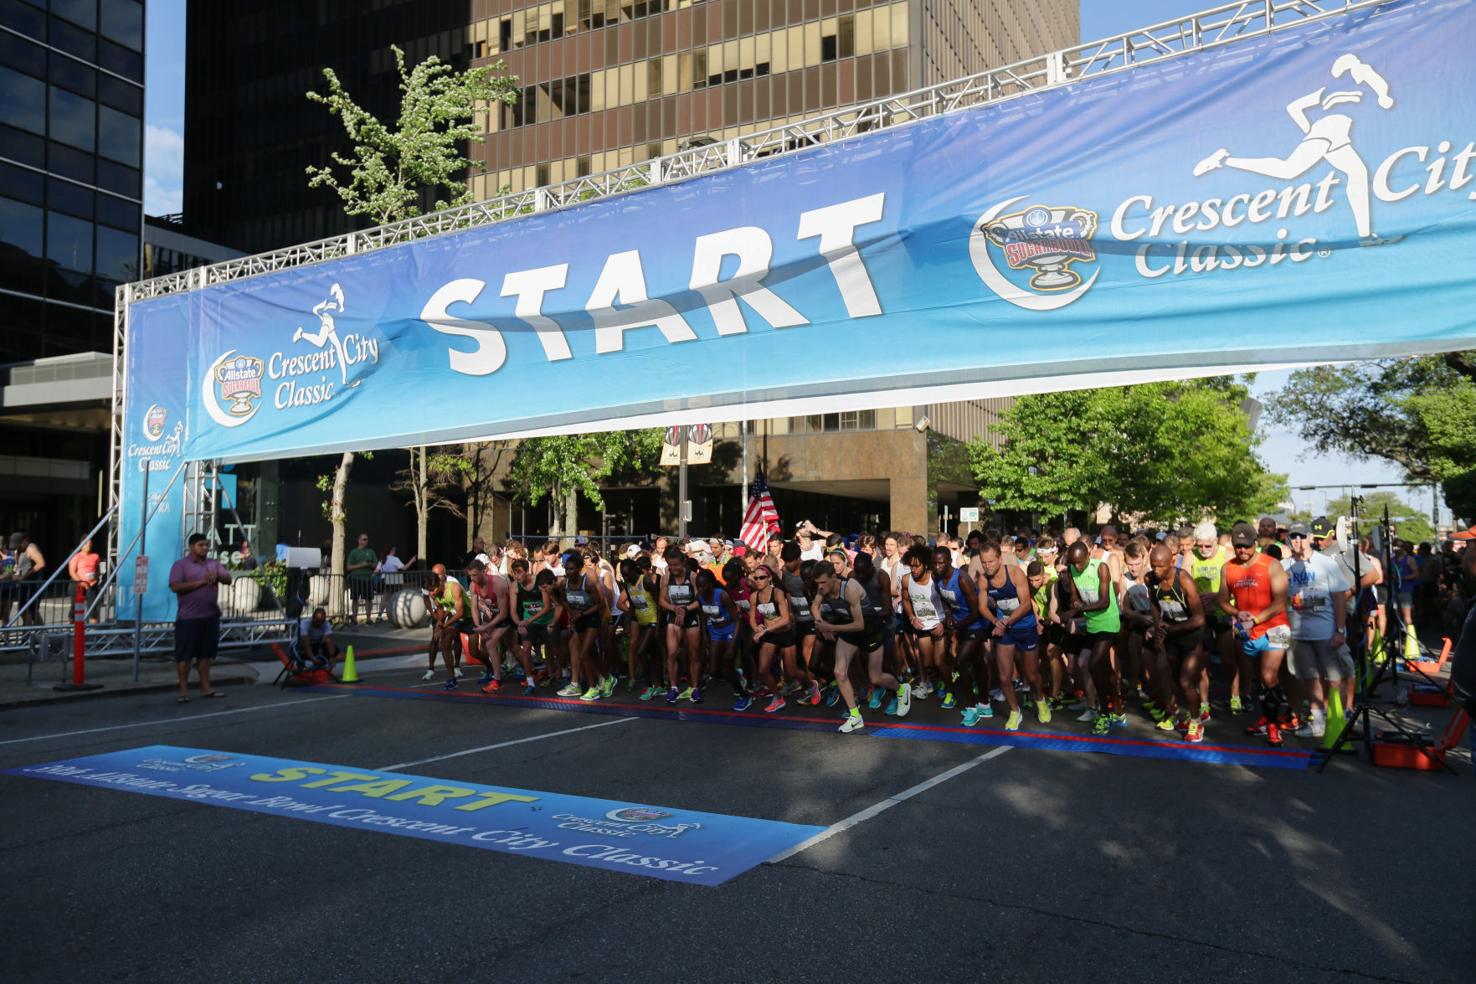 Preview Crescent City Classic hosts 10k run from Superdome to City